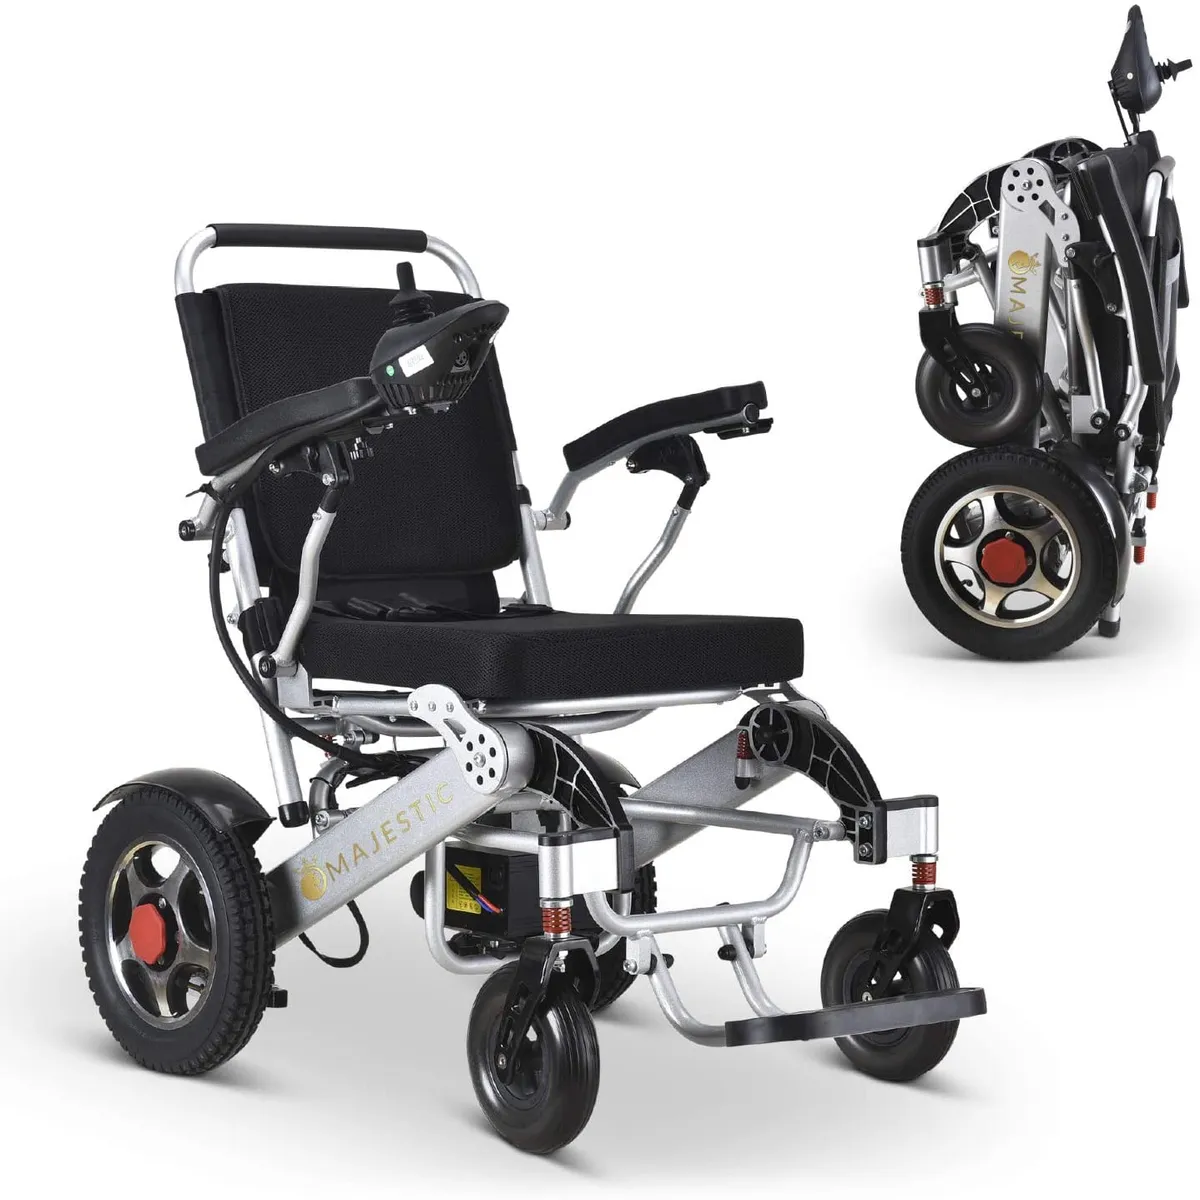 Best electric wheelchair for heavy person